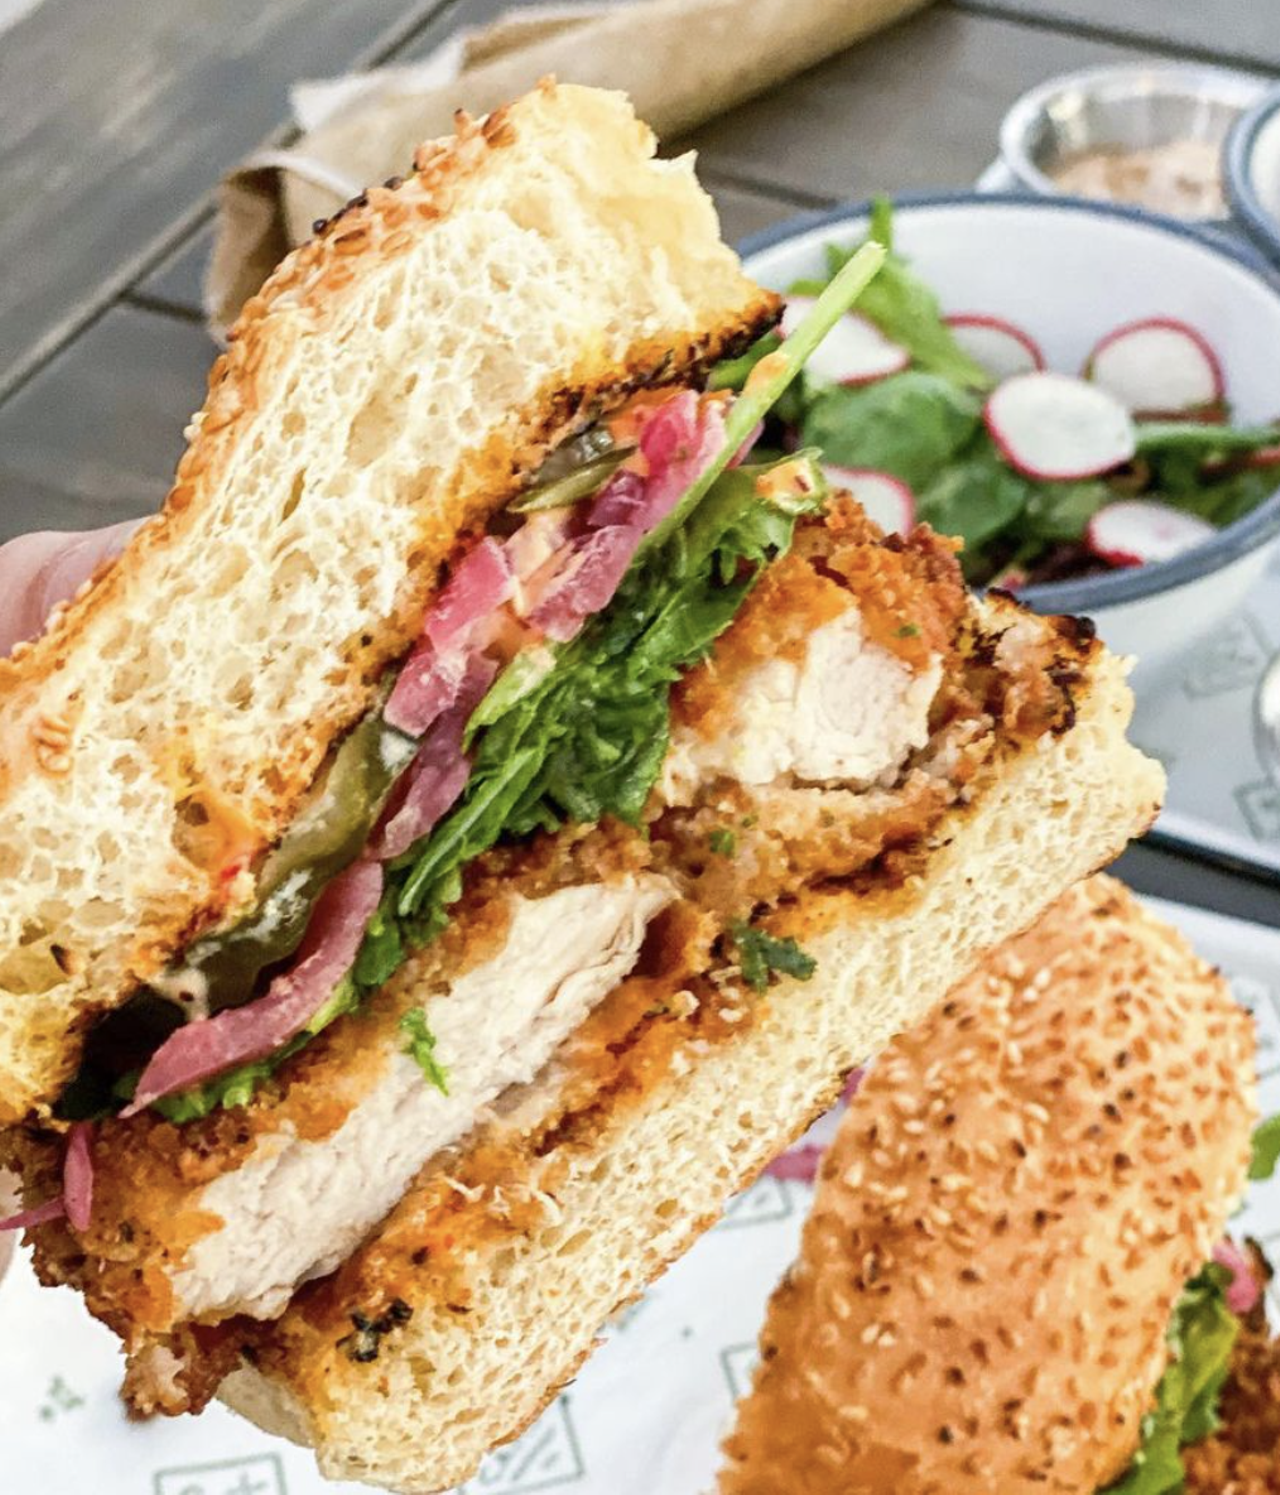 Camp Outpost
1811 S Alamo St, (210) 942-4690,  eatatcamp.com 
The tender fried chicken is not the only thing to love about this sandwich. Calabrian chile aioli, pickled red onions and arugula combine to offer big flavor in each and every bite. 
Photo via Instagram / stine.eats